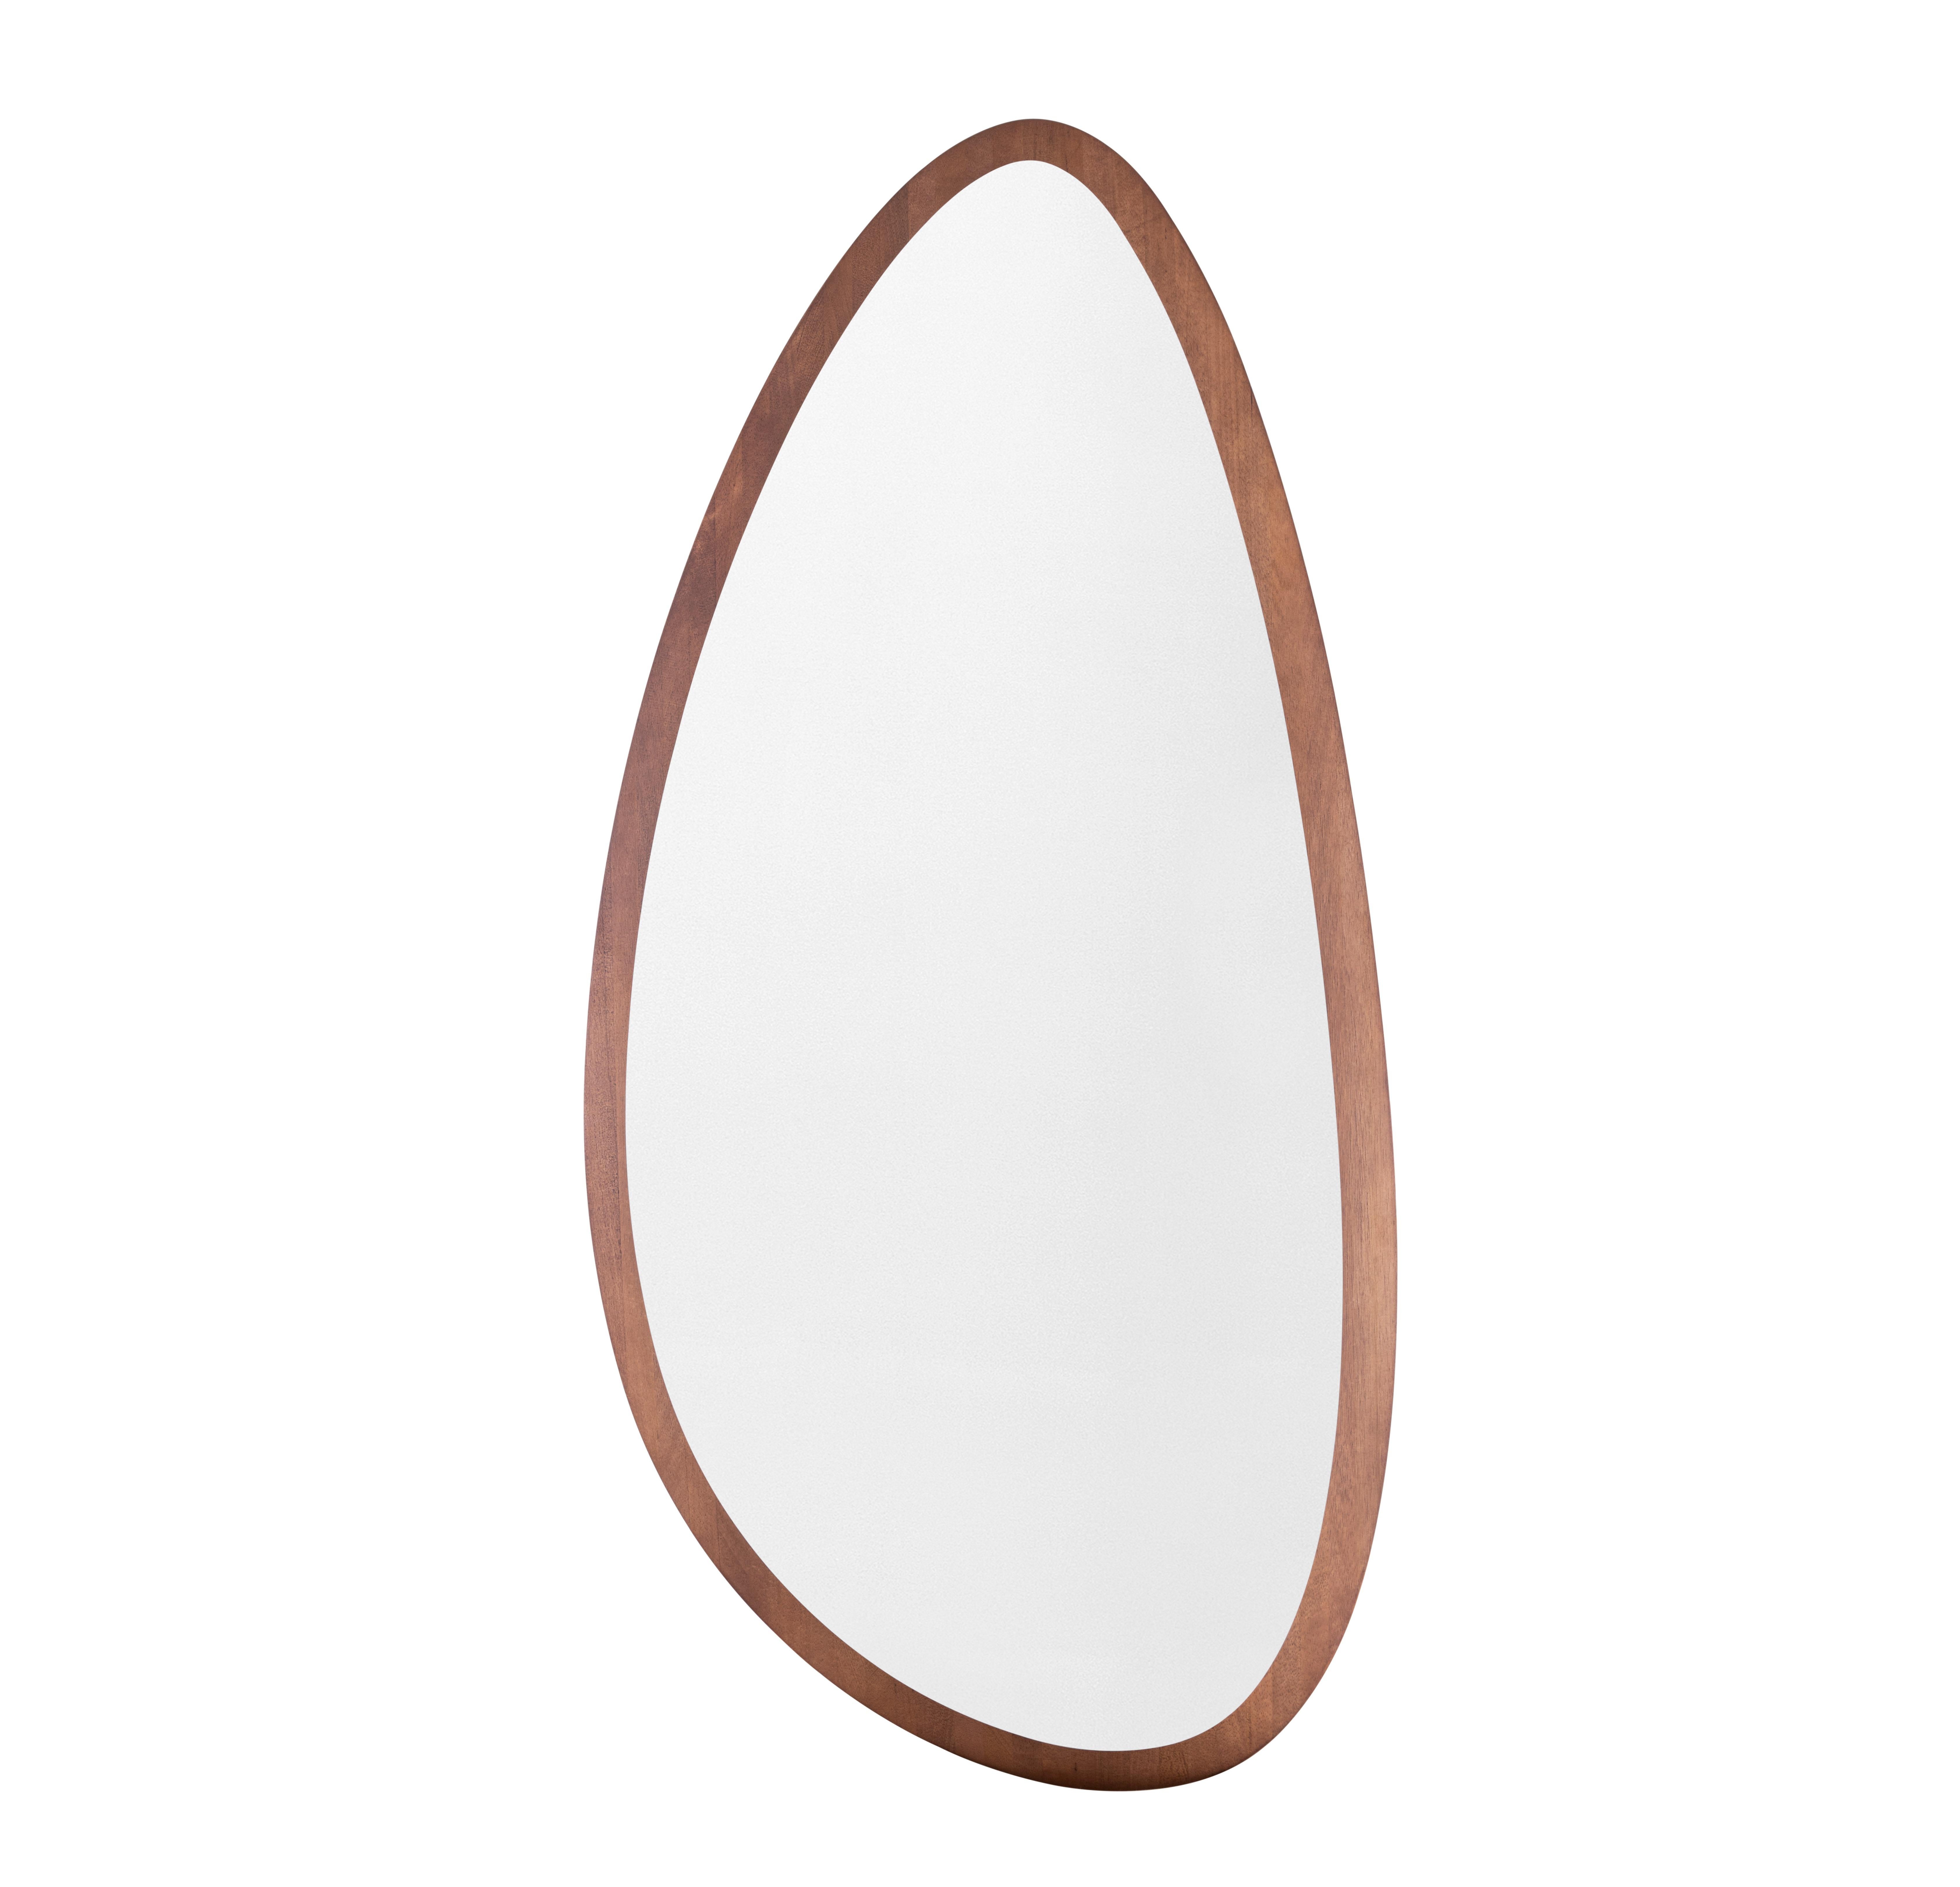 Pante Mirror in Walnut Wood Finish, Set of 4 In New Condition For Sale In Miami, FL